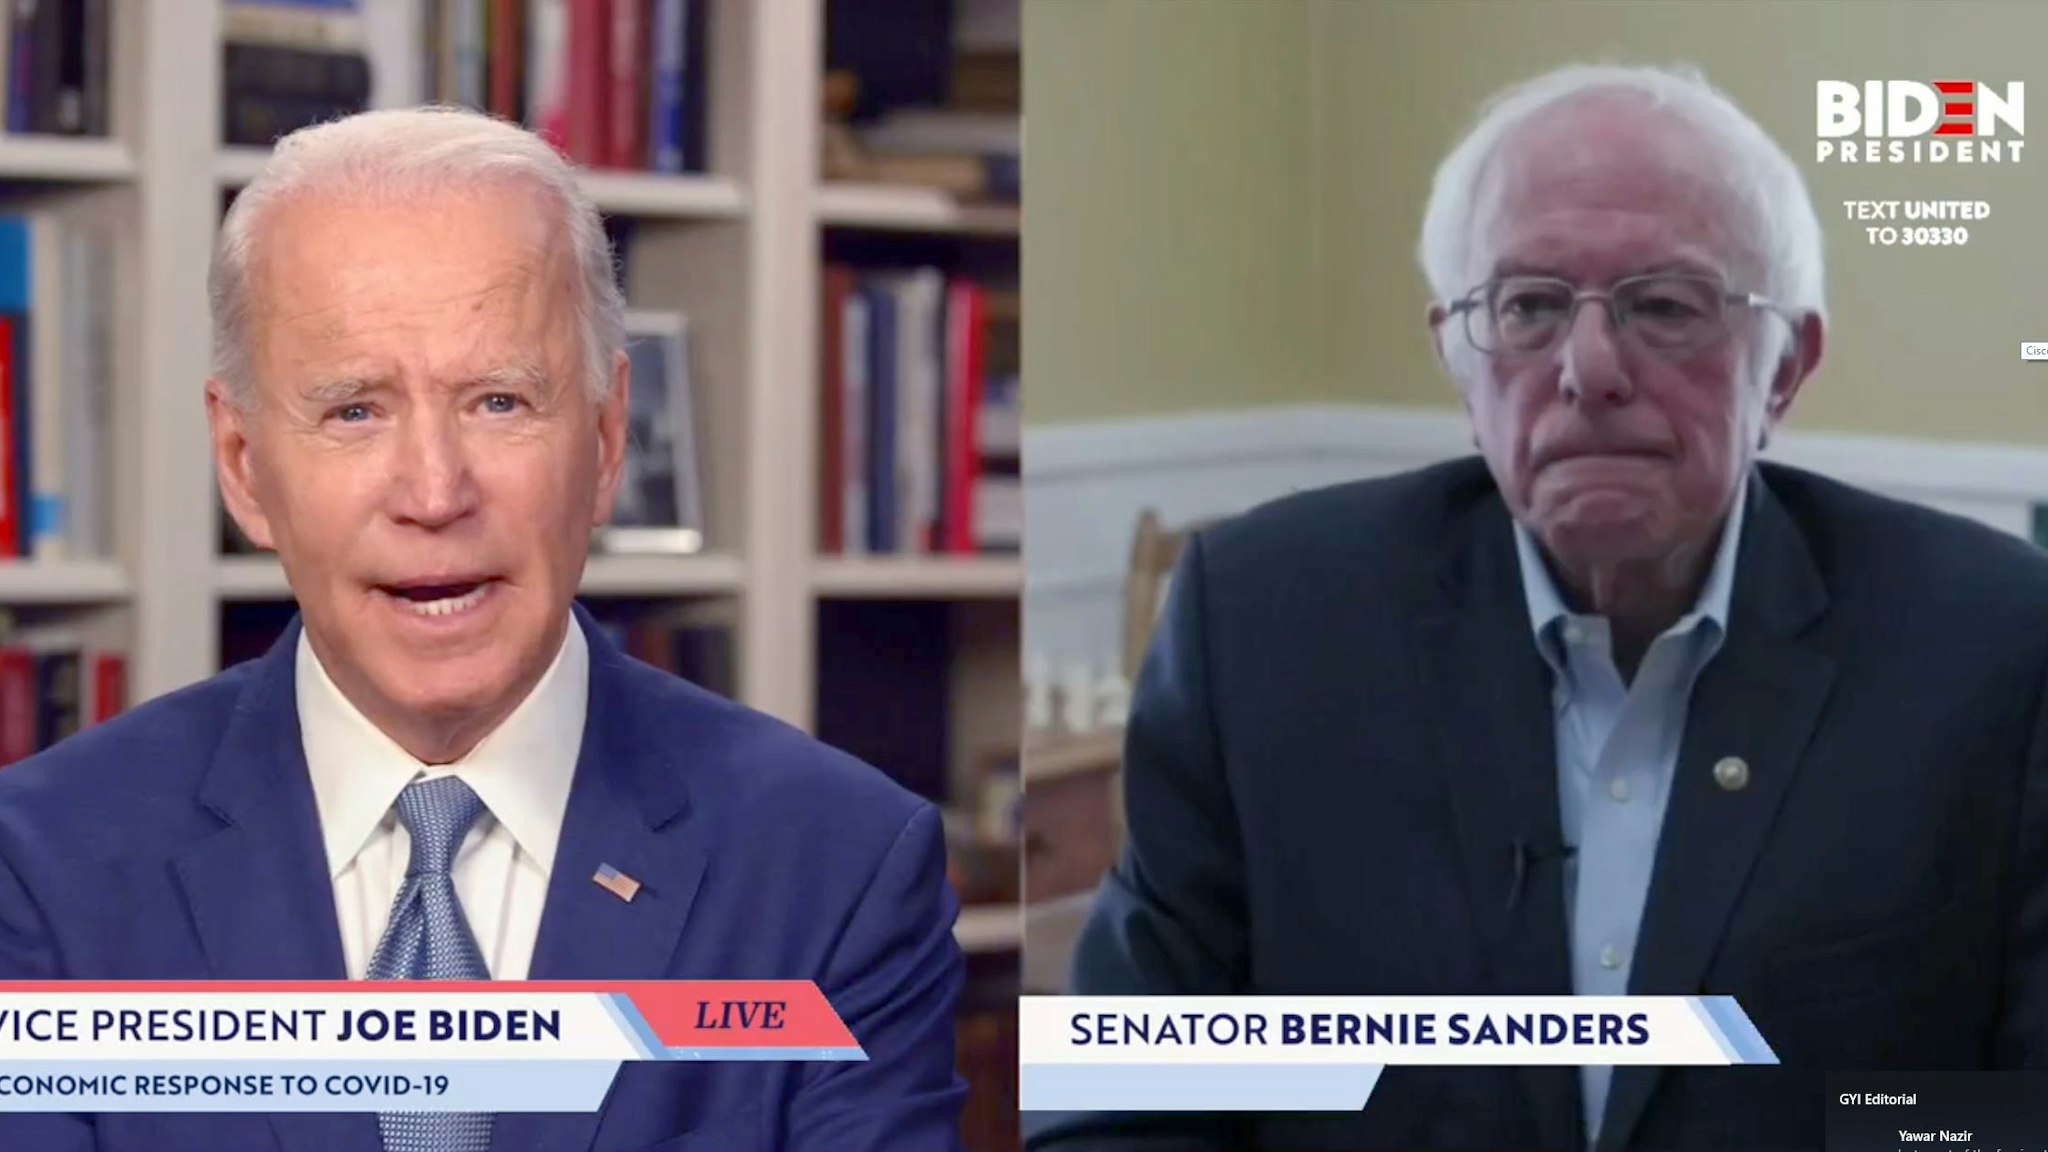 UNKNOWN LOCATION - APRIL 13: In this screengrab taken from JoeBiden.com campaign website, U.S. Sen. Bernie Sanders (I-VT) endorses Democratic presidential candidate former Vice President Joe Biden during a live streaming broadcast on April 13, 2020. Sanders said, “Today, I am asking all Americans—I’m asking every Democrat, I’m asking every Independent, I’m asking a lot of Republicans—to come together in this campaign to support your candidacy.” (Photo by JoeBiden.com via Getty Images)